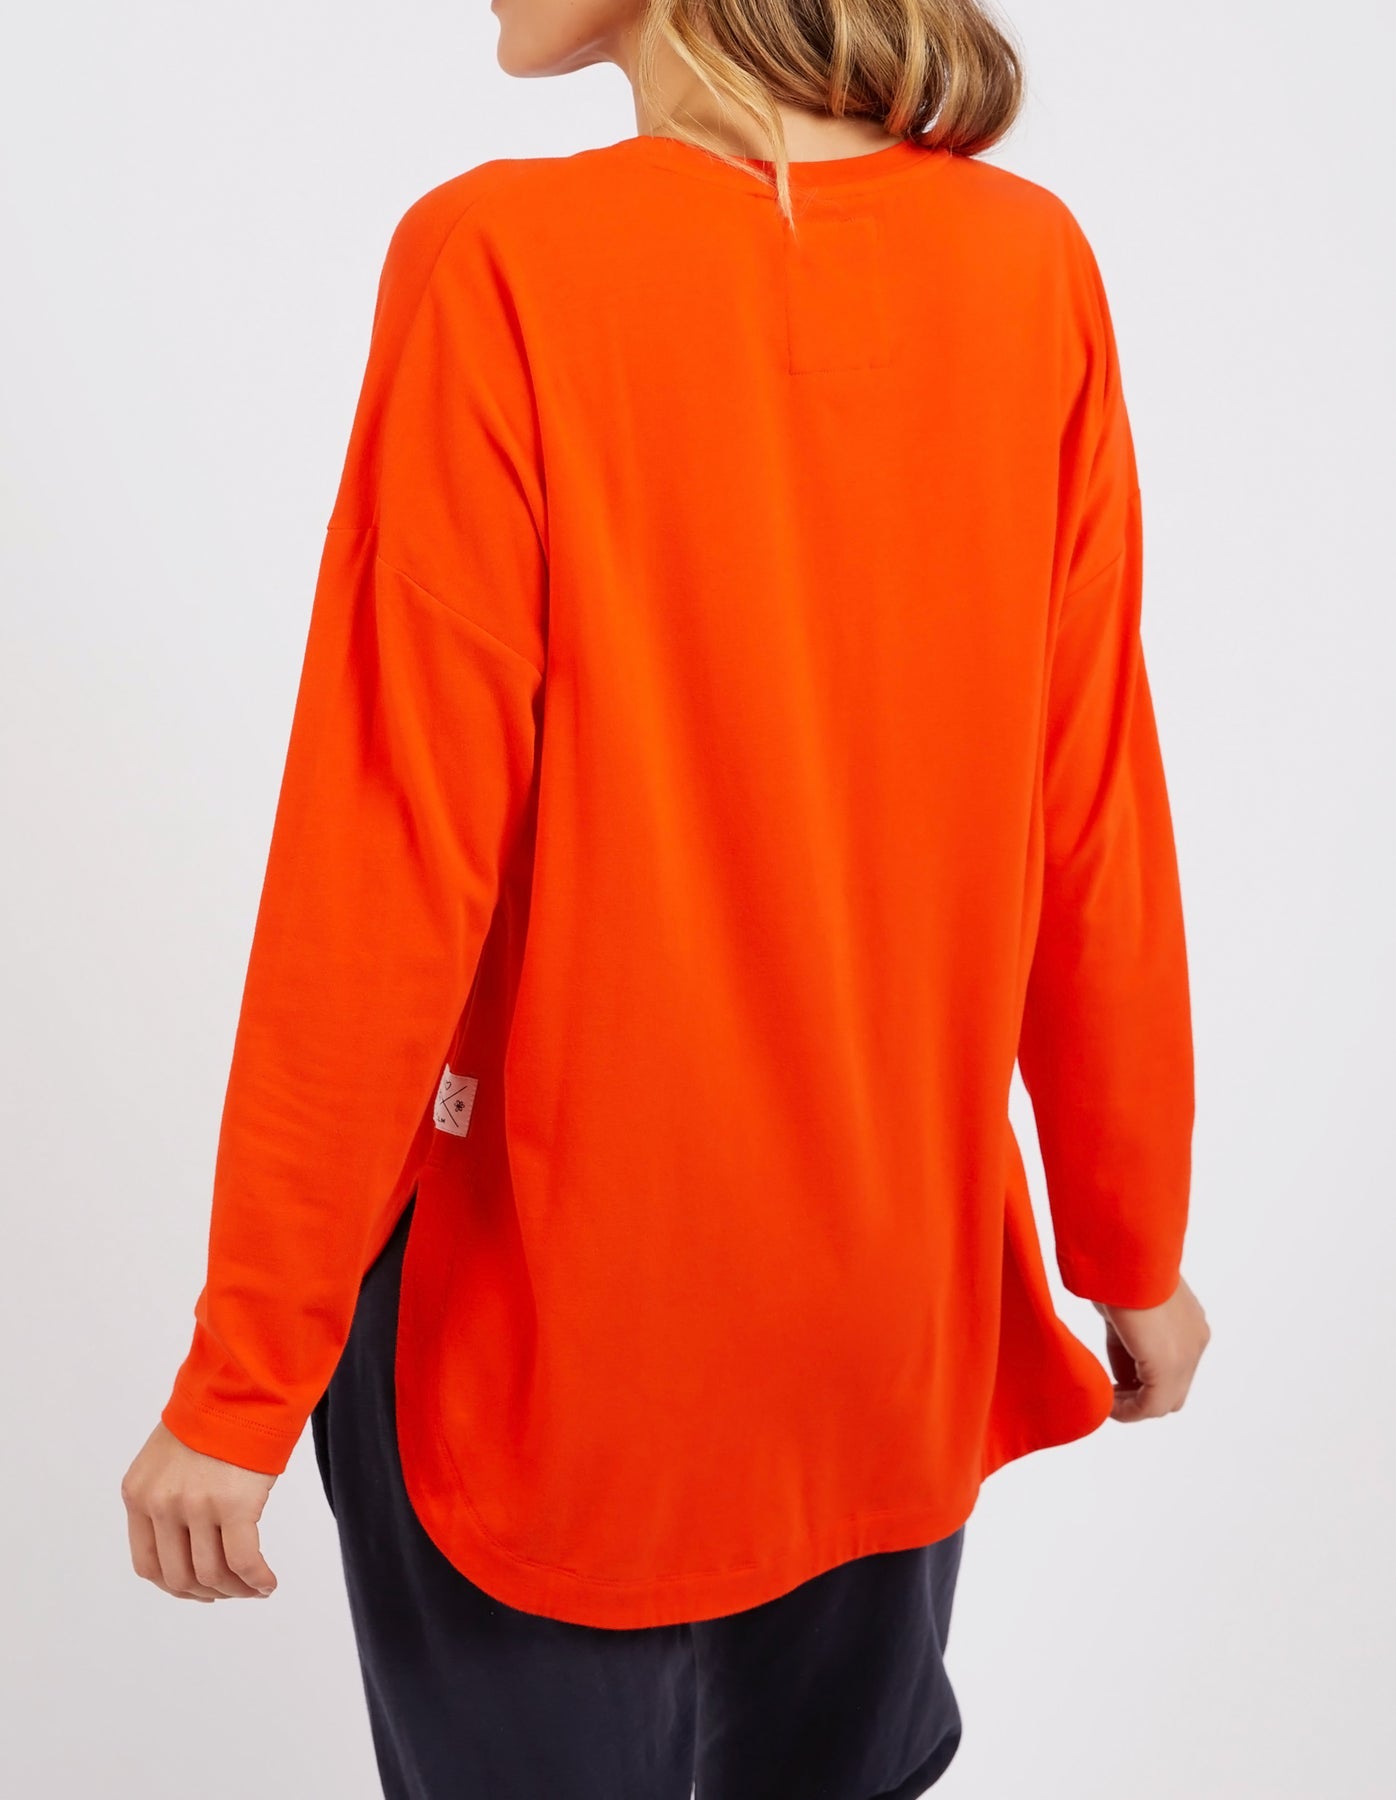 ELM SOCIETY L/S TEE - TANGELO - THE VOGUE STORE